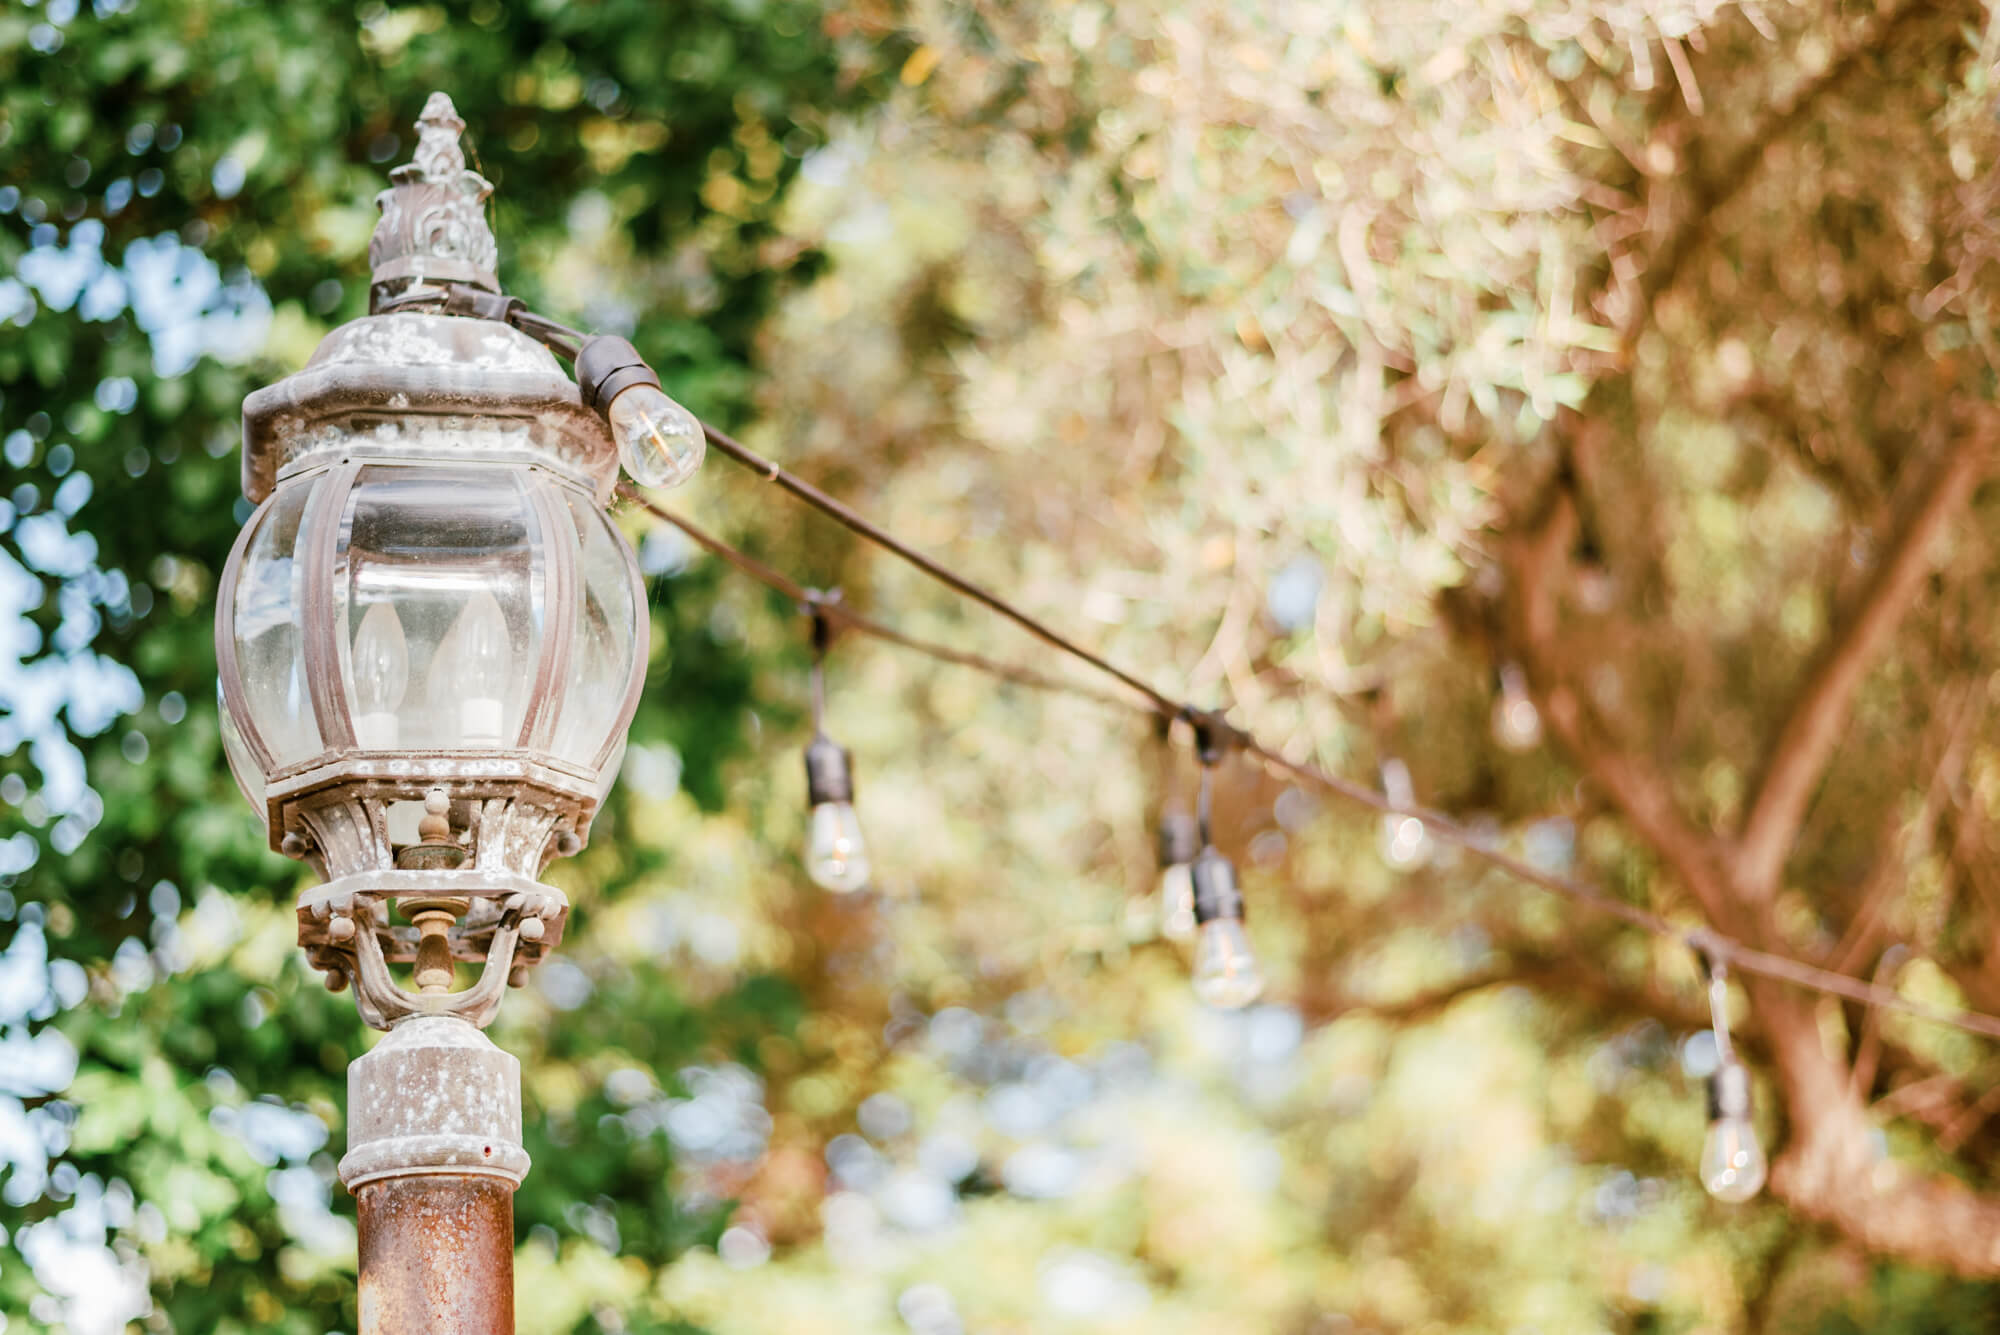 Spring lights are anchored to a European-style lamp in a backyard.